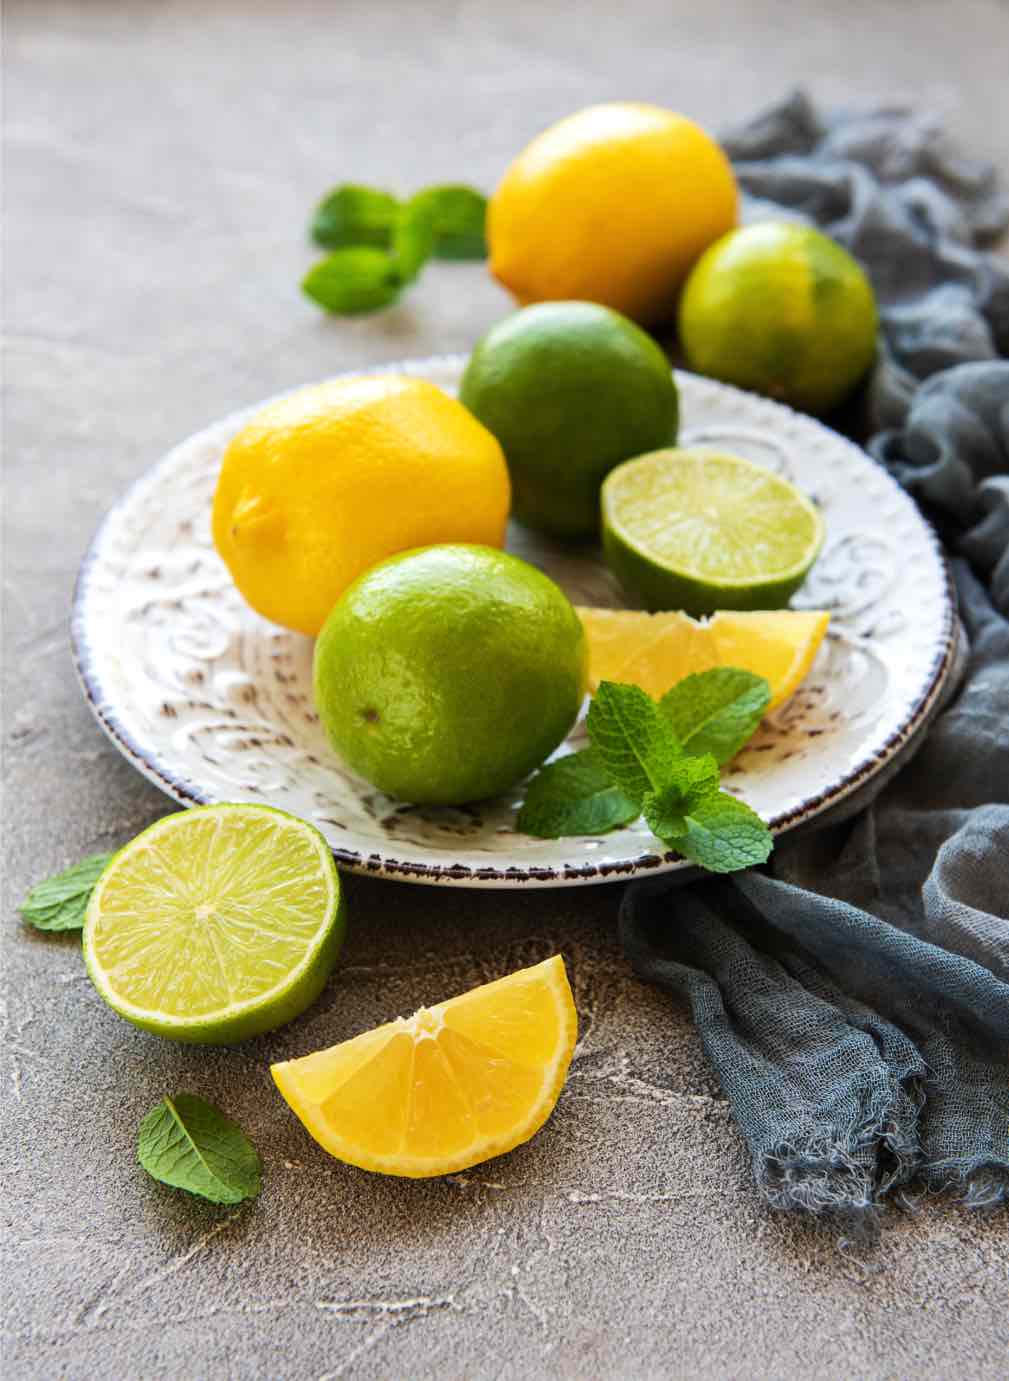 Lemons and limes are great for humans, but not for dogs - learn more with Dog Training Elite Arizona in Mesa!